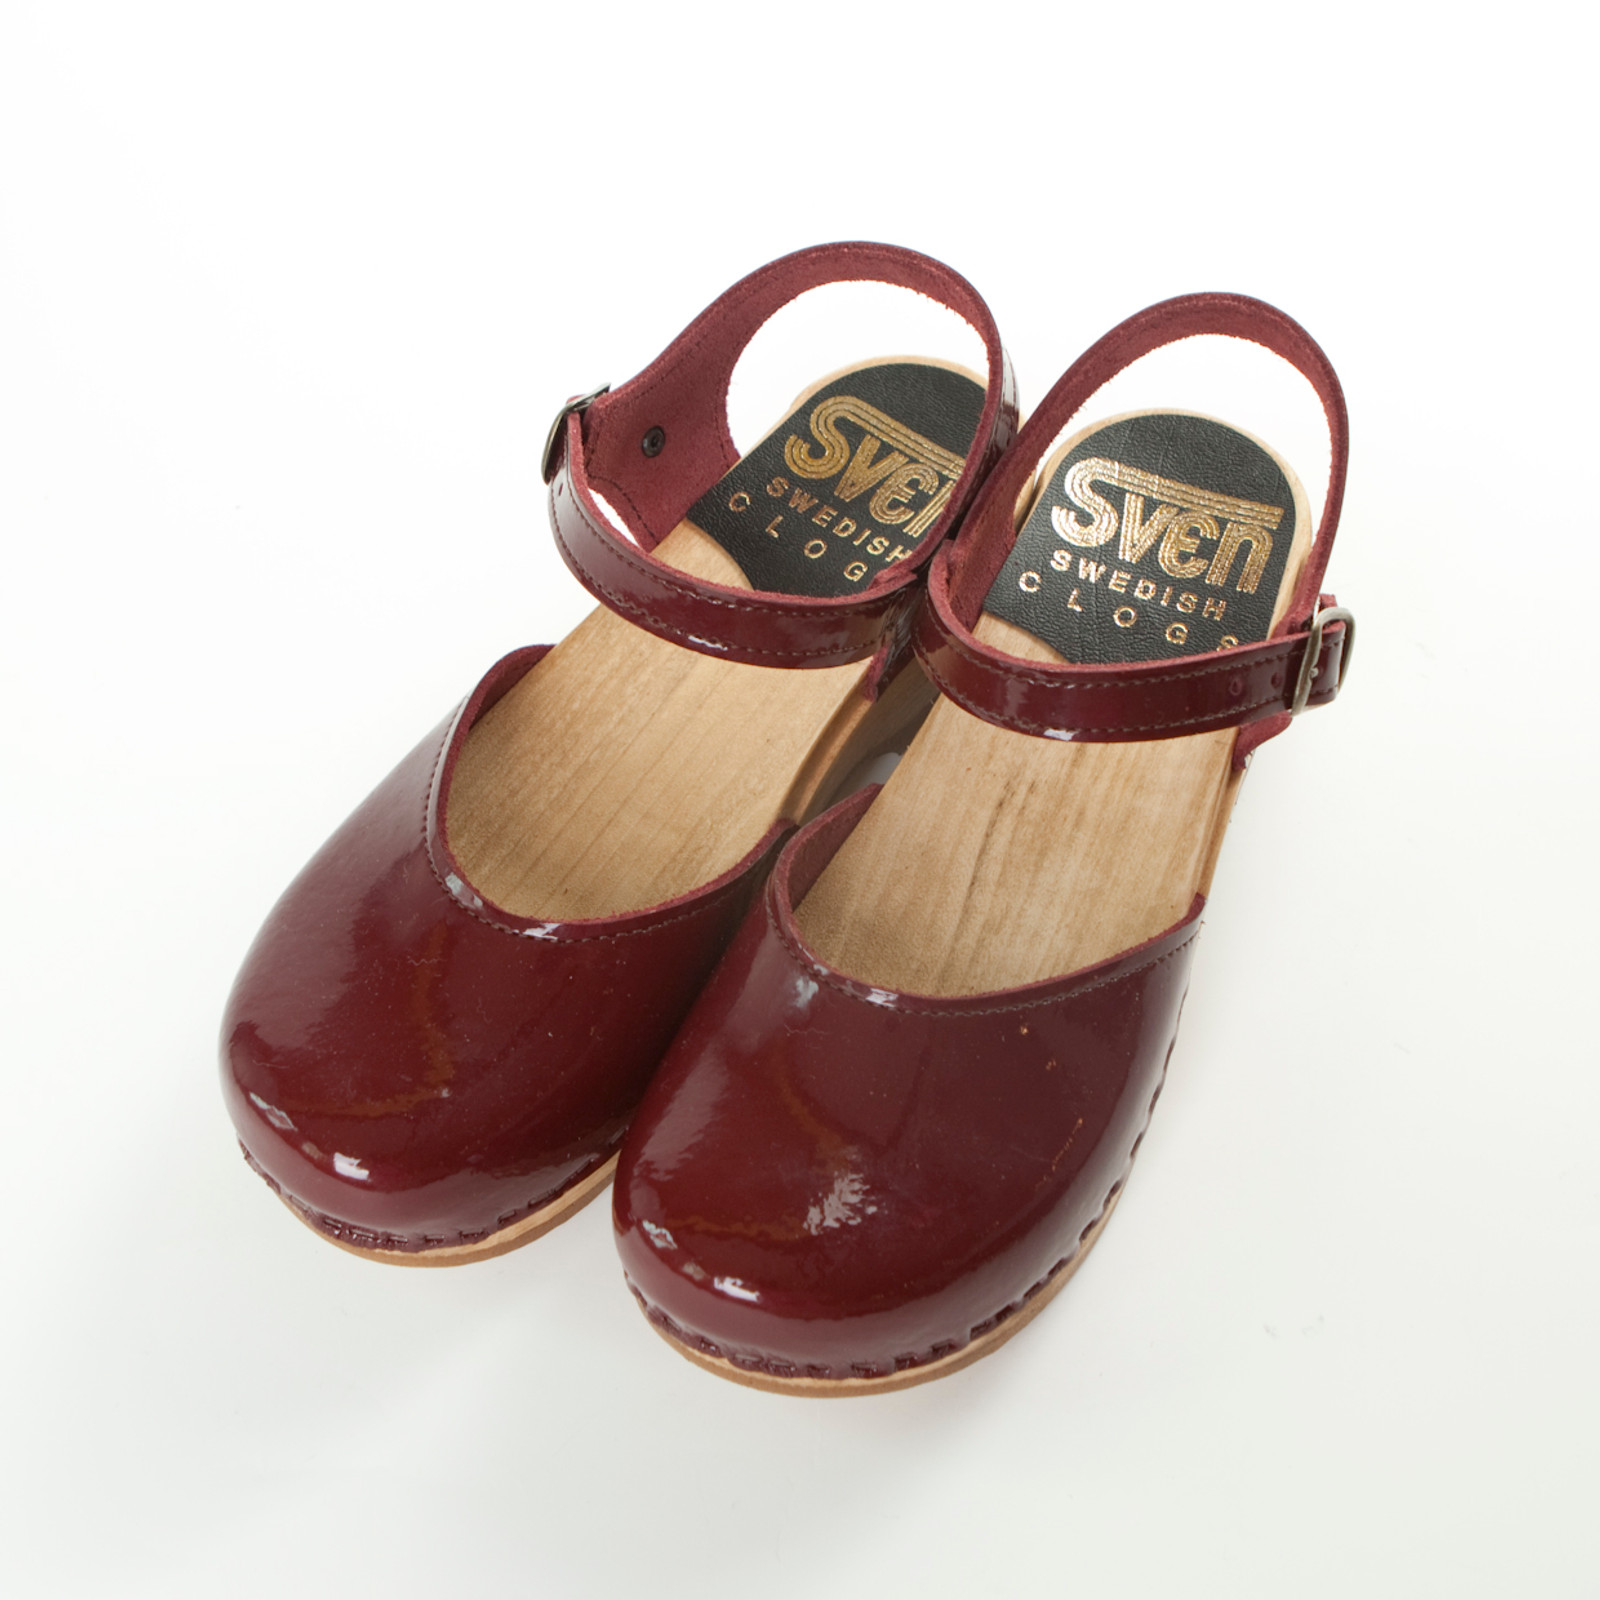 Bordeaux Patent Leather with Brown Base